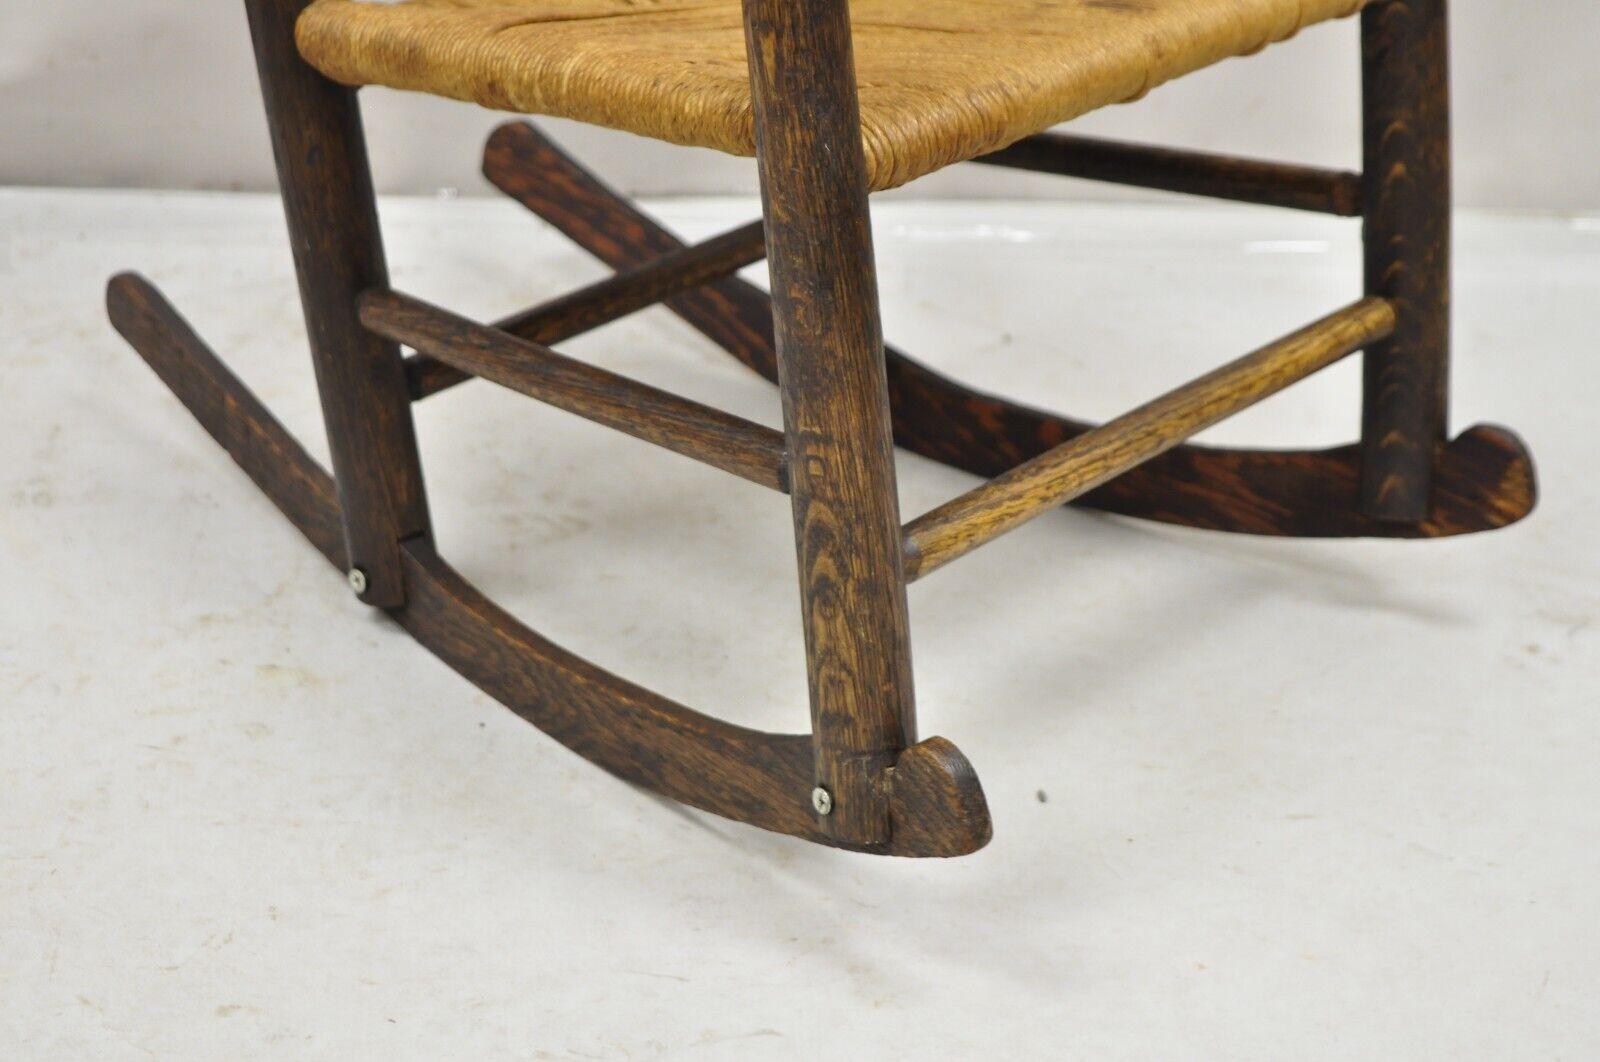 Antique Arts & Crafts Victorian Oak Wood Rush Seat Small Child's Rocking Chair In Good Condition For Sale In Philadelphia, PA